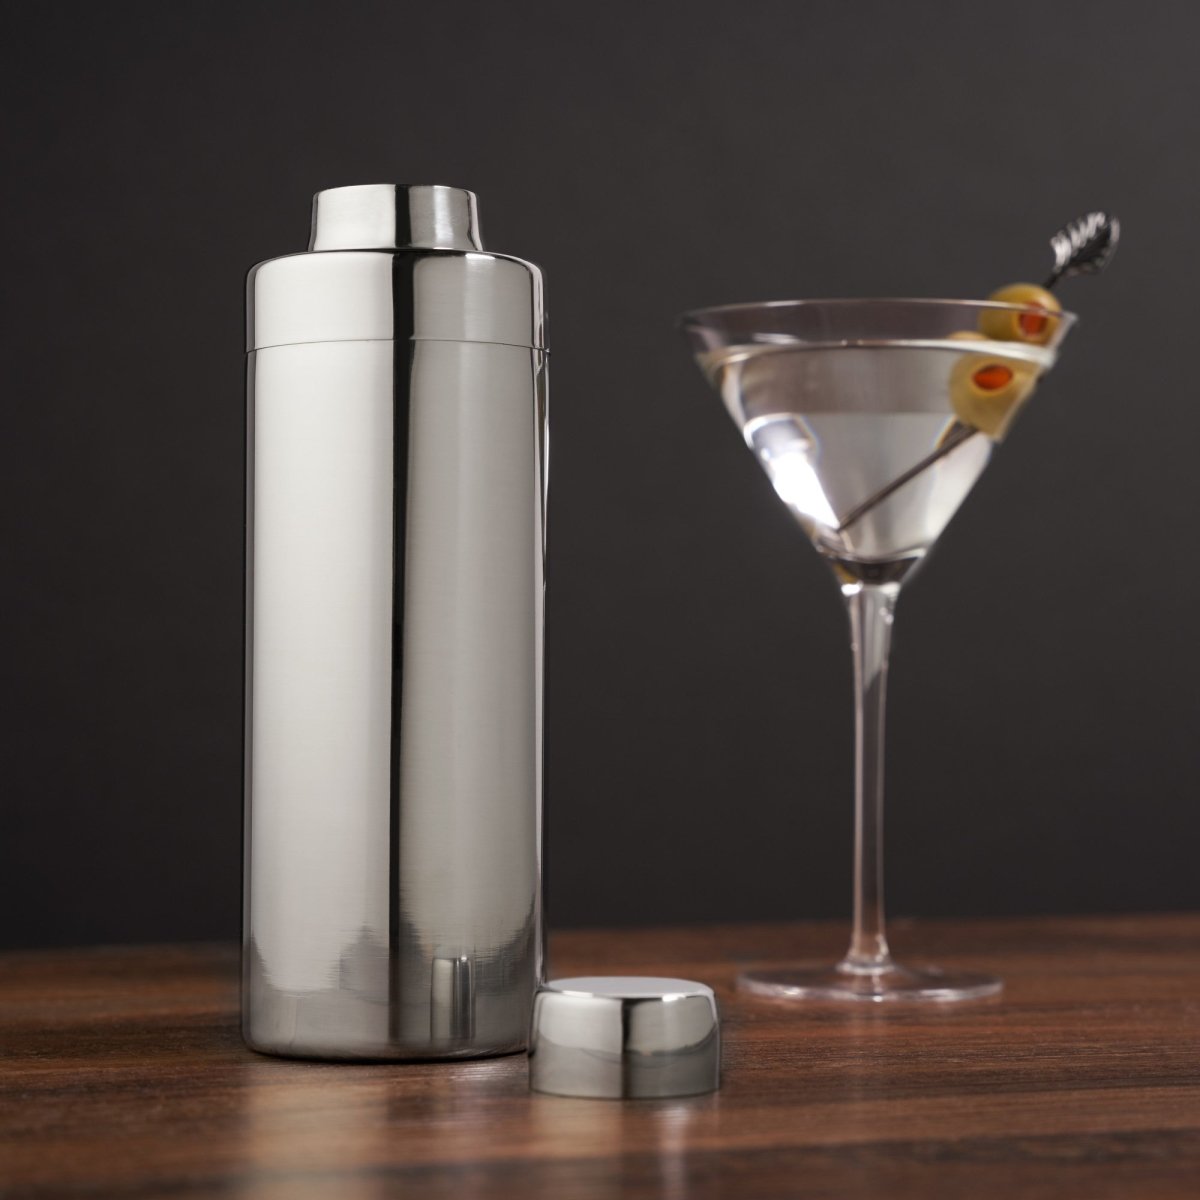 https://cdn.shopify.com/s/files/1/0275/1876/3088/products/element-24oz-stainless-cocktail-shaker-697939_1445x.jpg?v=1667946791